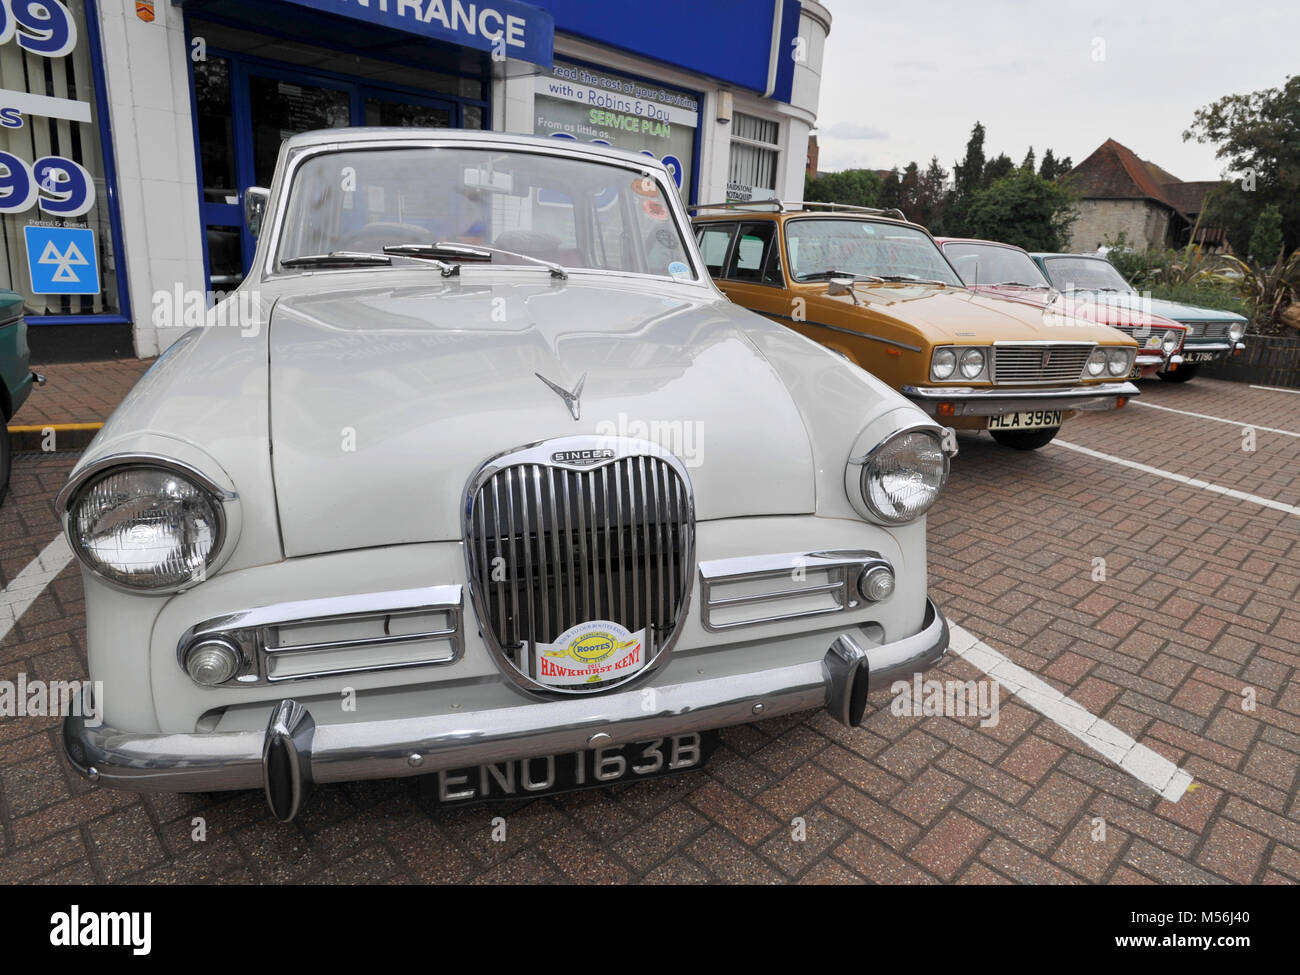 Meeting of classic Hillman and Singer Rootes Group cars at the old Maidstone factory, the art deco building is now a Peugeot car dealership Stock Photo